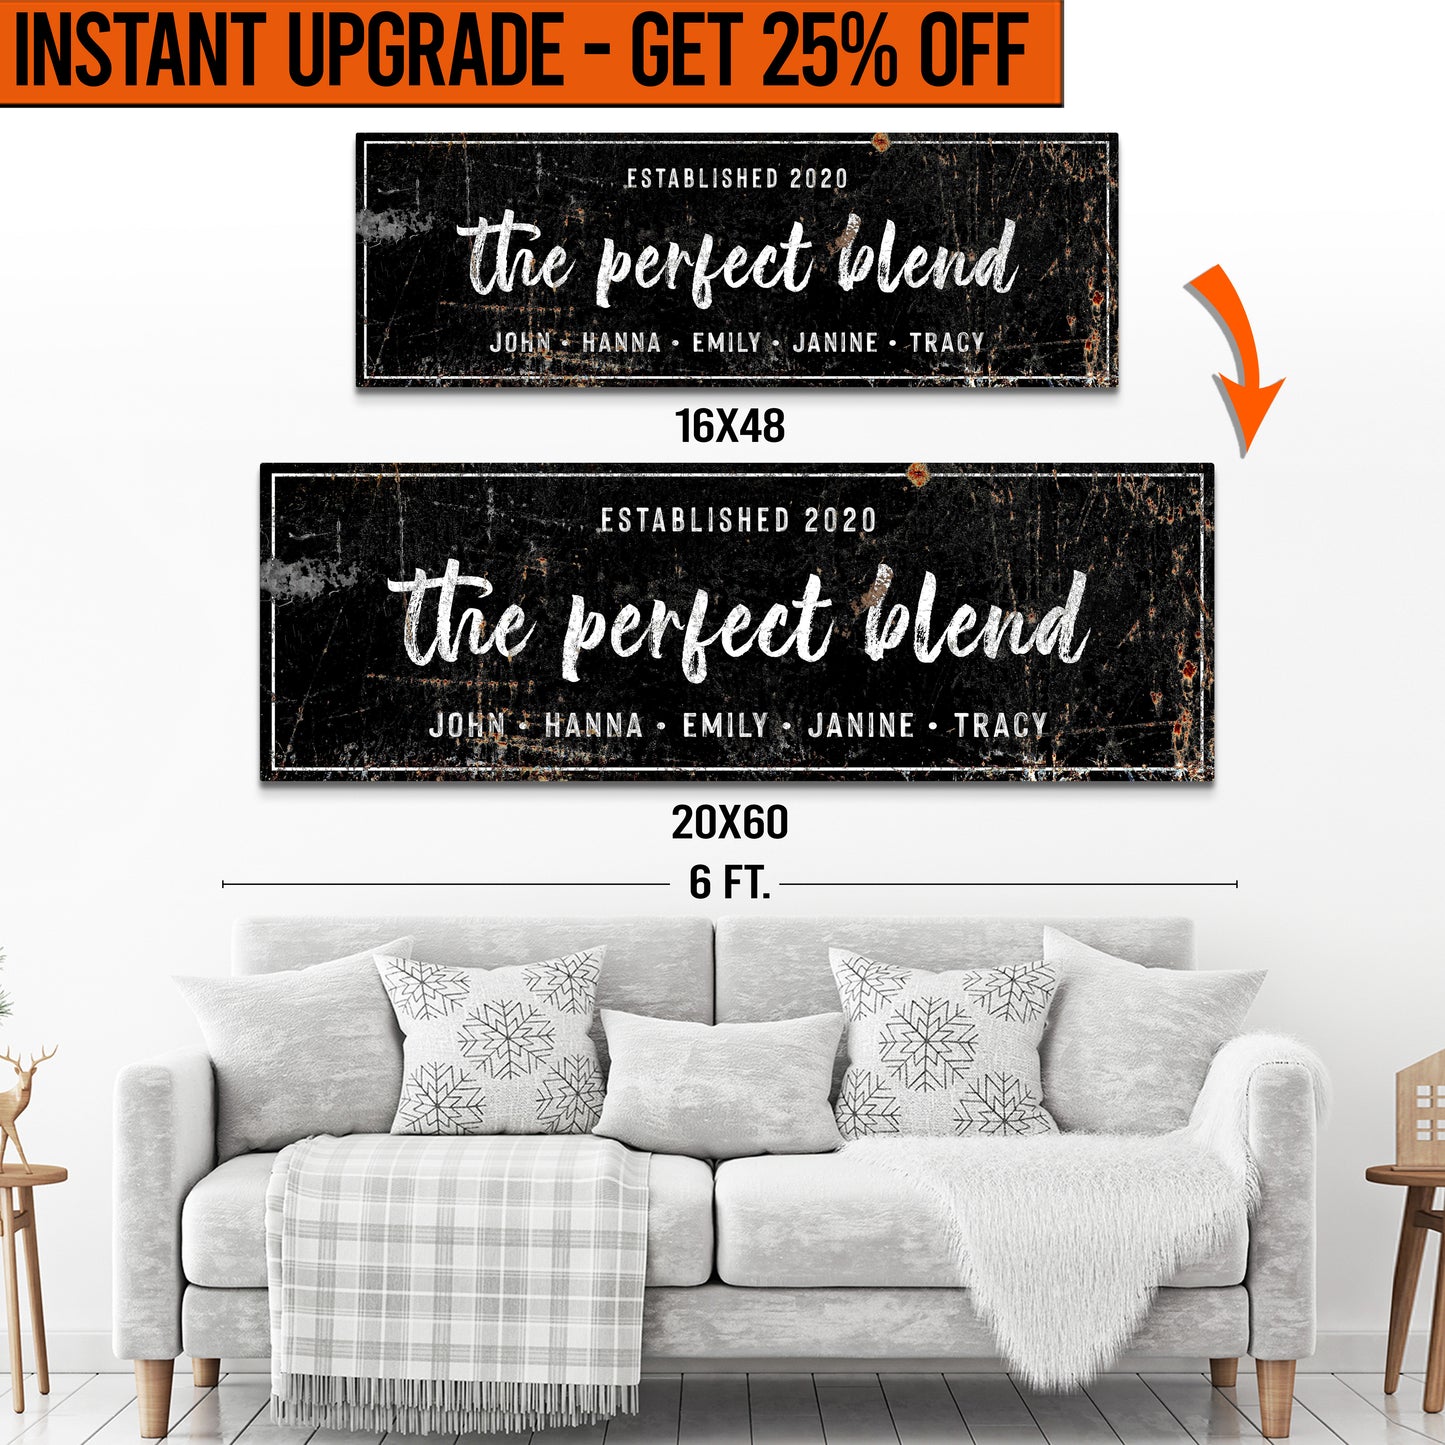 Upgrade Your 16x48 Inches 'The Perfect Blend' (Style 2) Canvas To 20x60 Inches